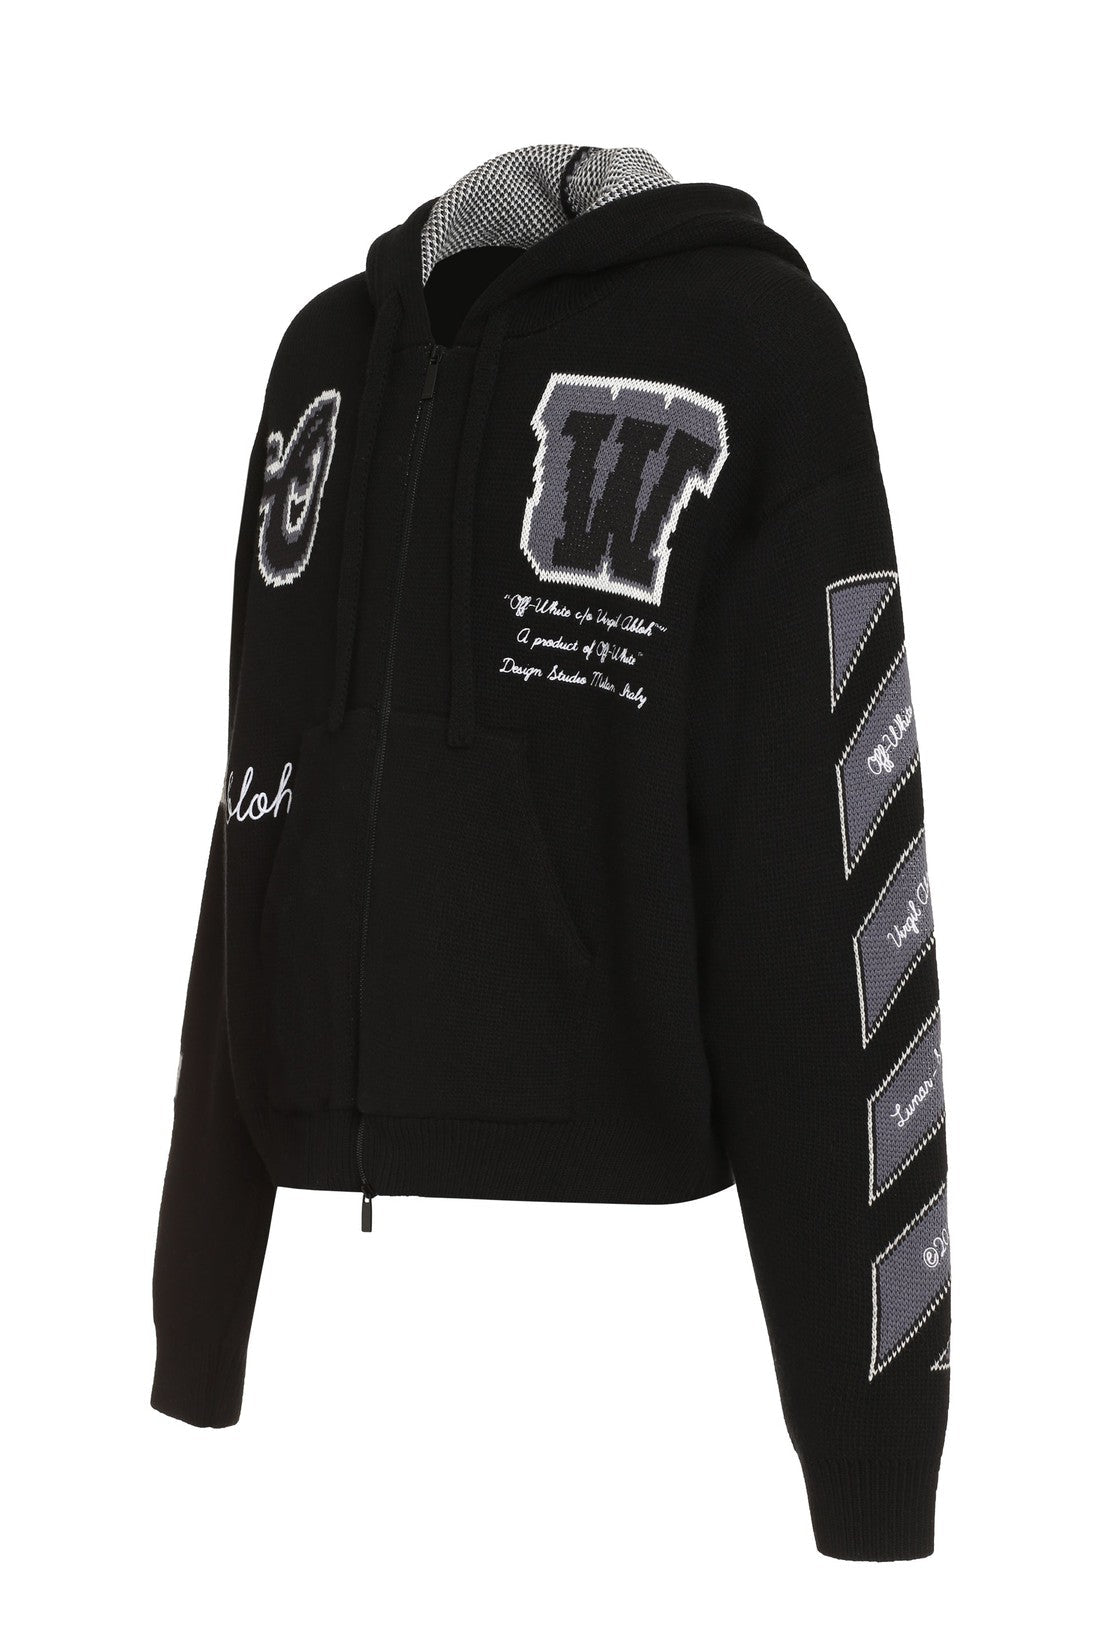 Off-White-OUTLET-SALE-Varsity knitted full zip hoodie-ARCHIVIST